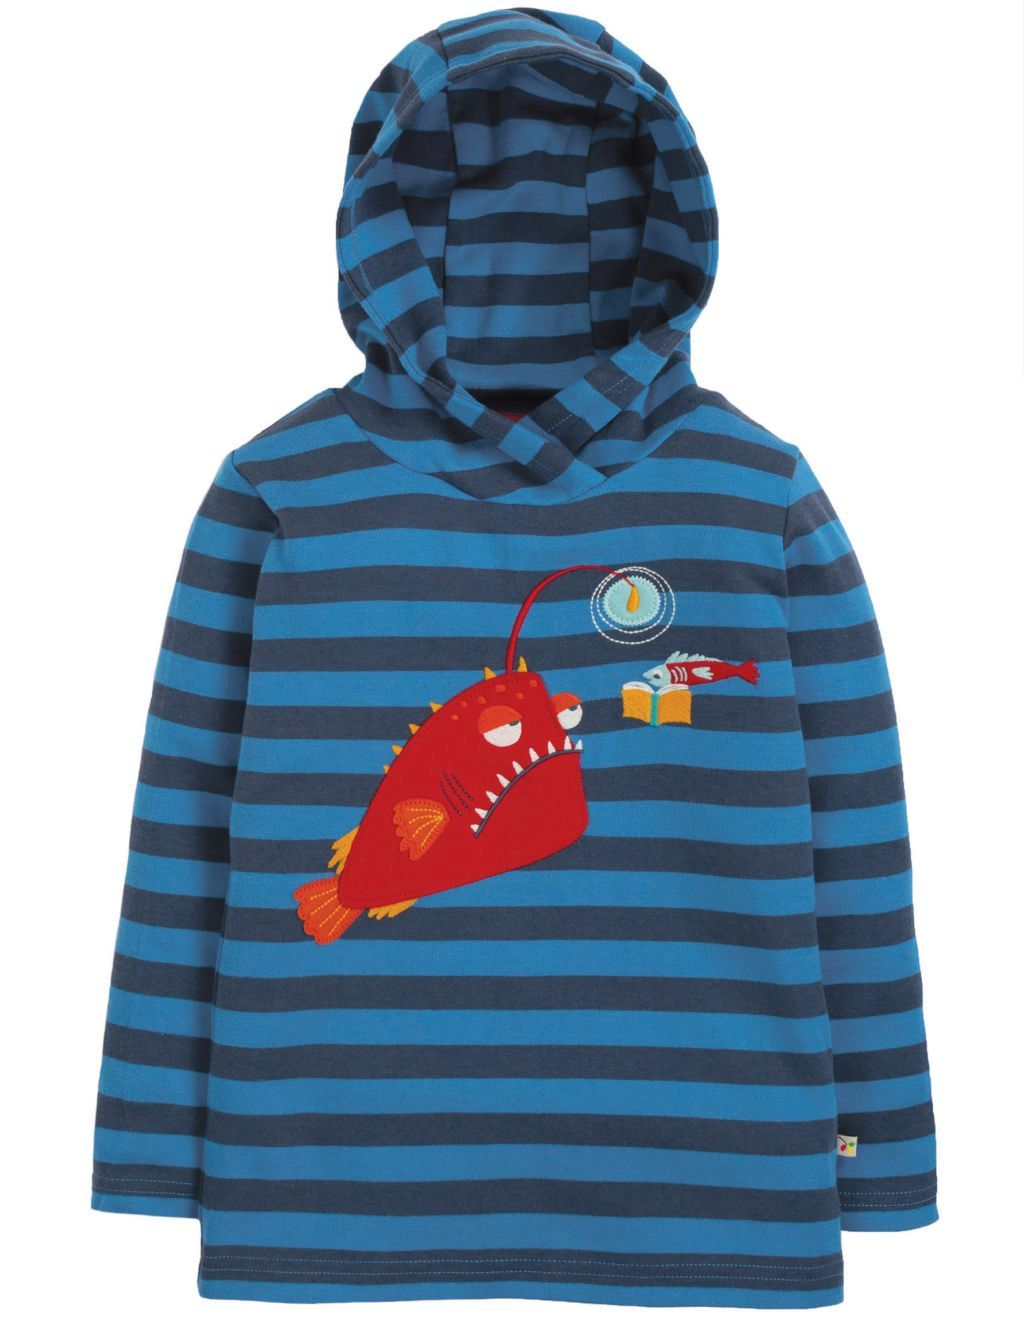 Campfire Hooded Top sail blue stripe/Angler Fish 134/140